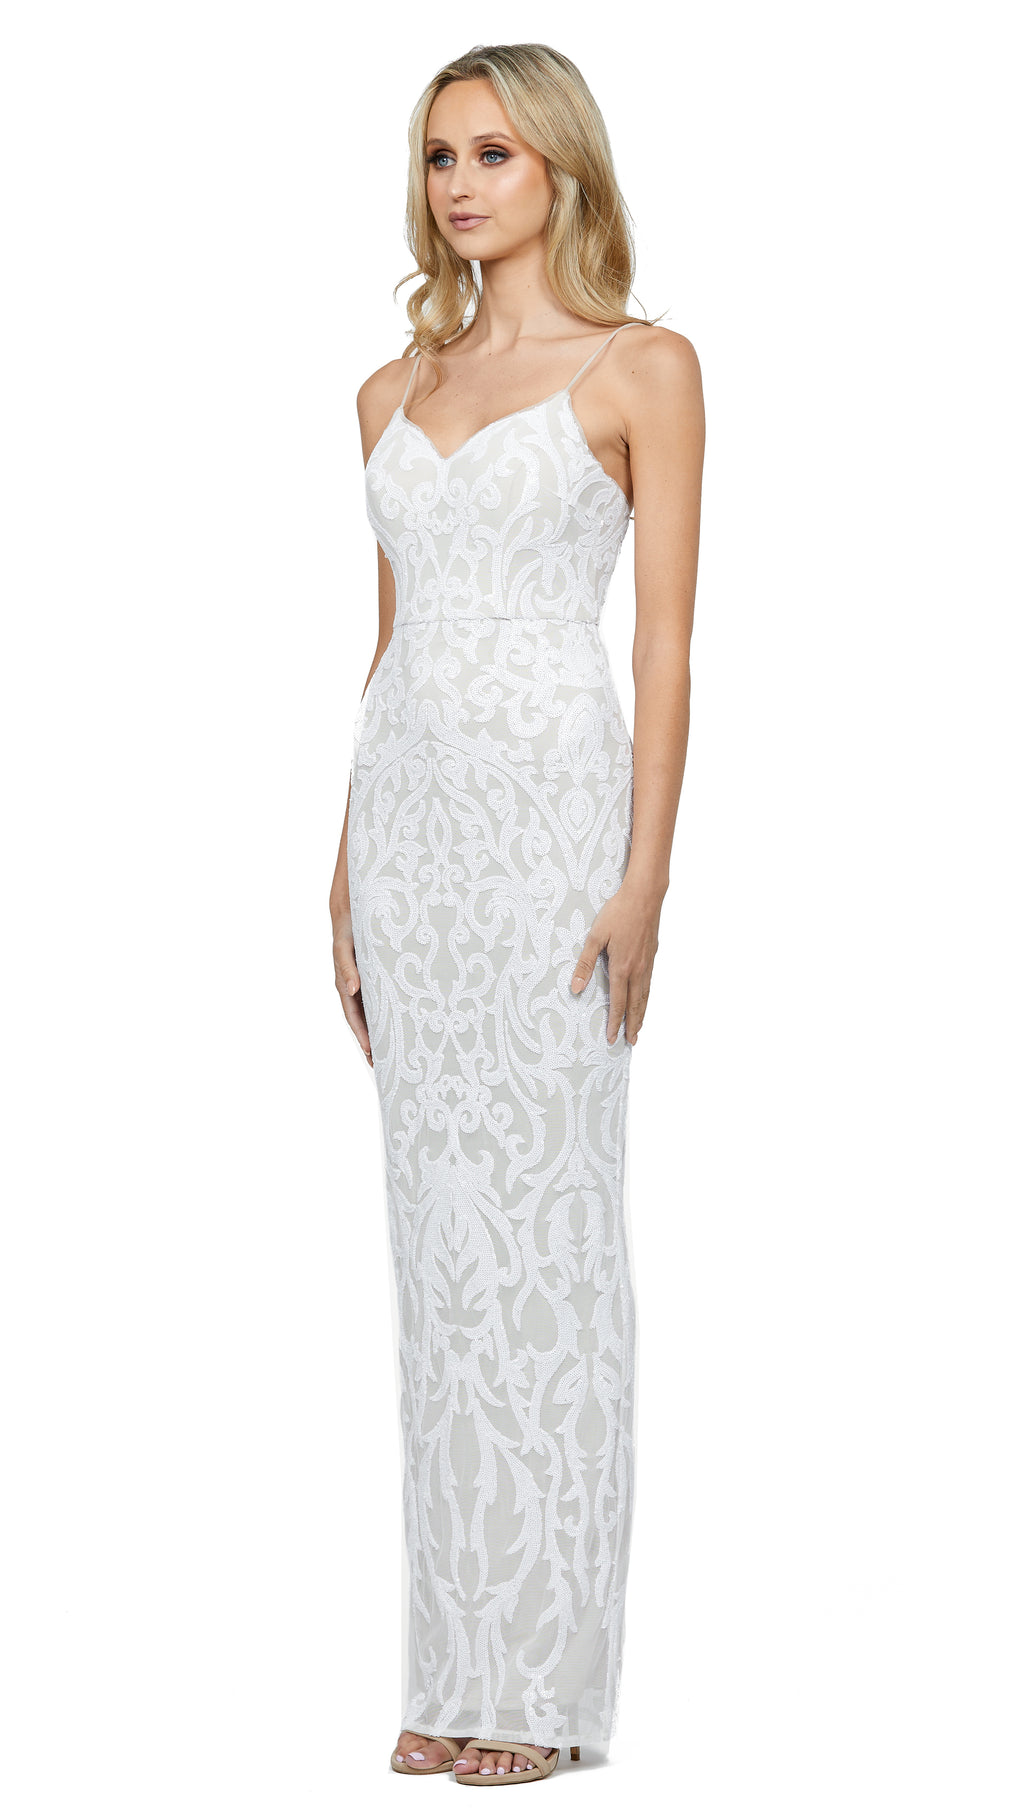 Sherlie V Neck Gown in White/Nude SIDE